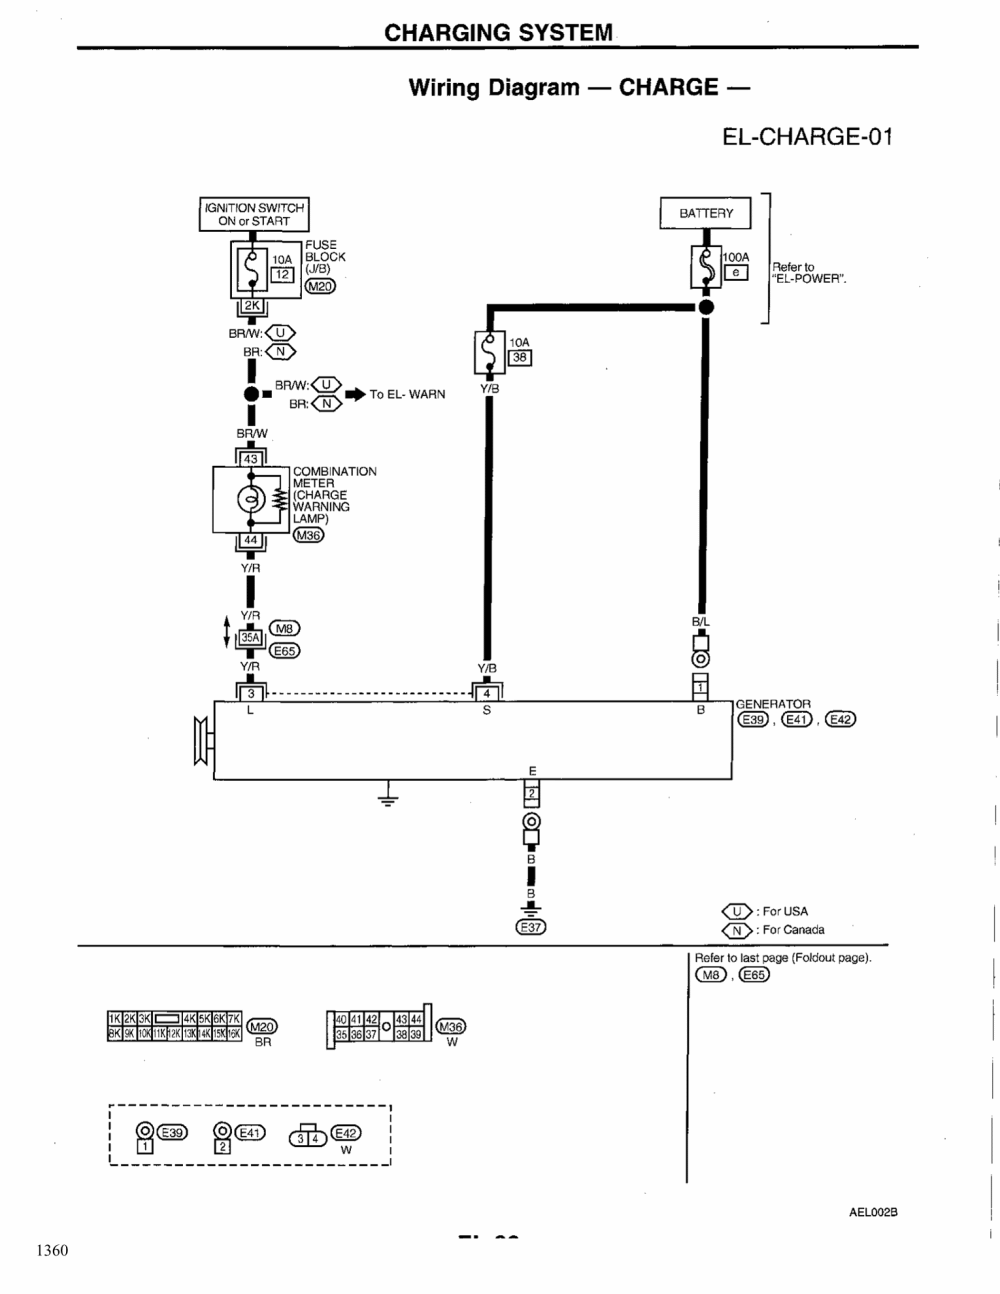 System Wiring Diagrams : 1999 Chevrolet Corvette System Wiring Diagrams